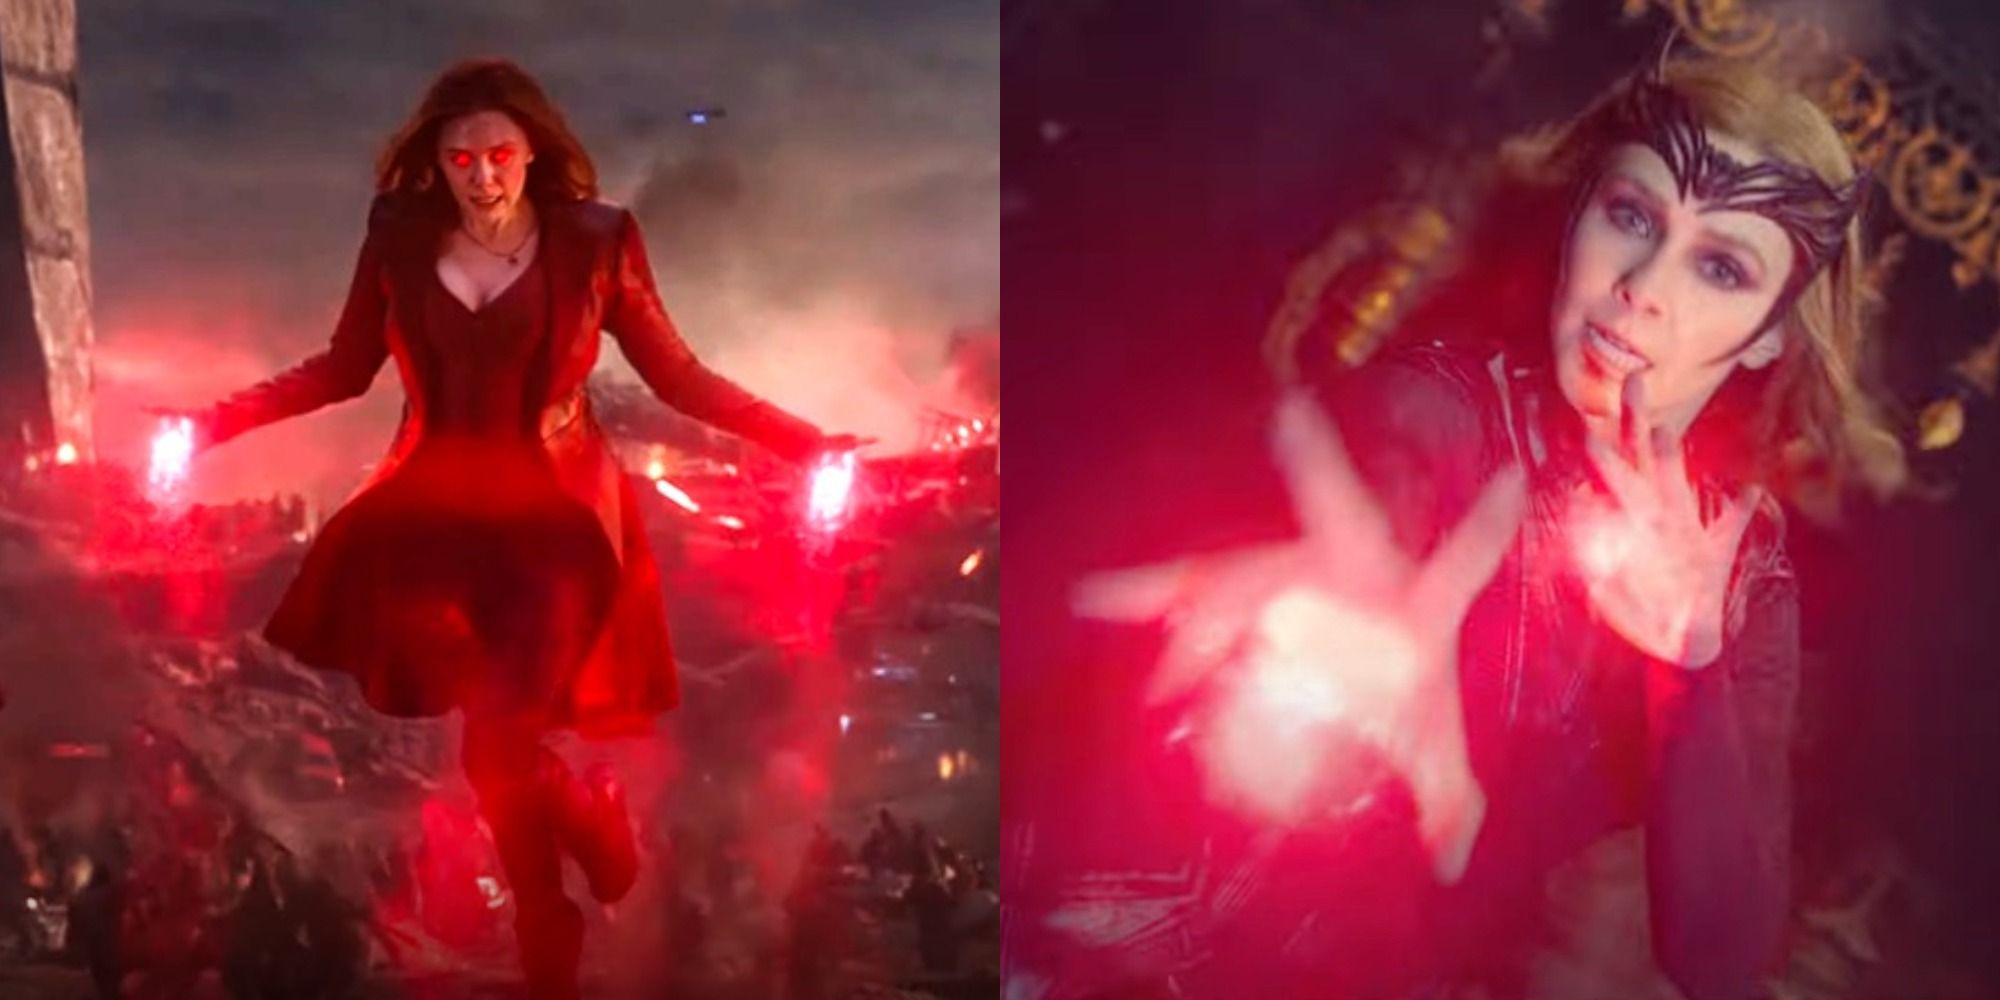 Elizabeth Olsen as Scarlet Witch in Avengers Endgame and Doctor Strange in the Multiverse of Madness